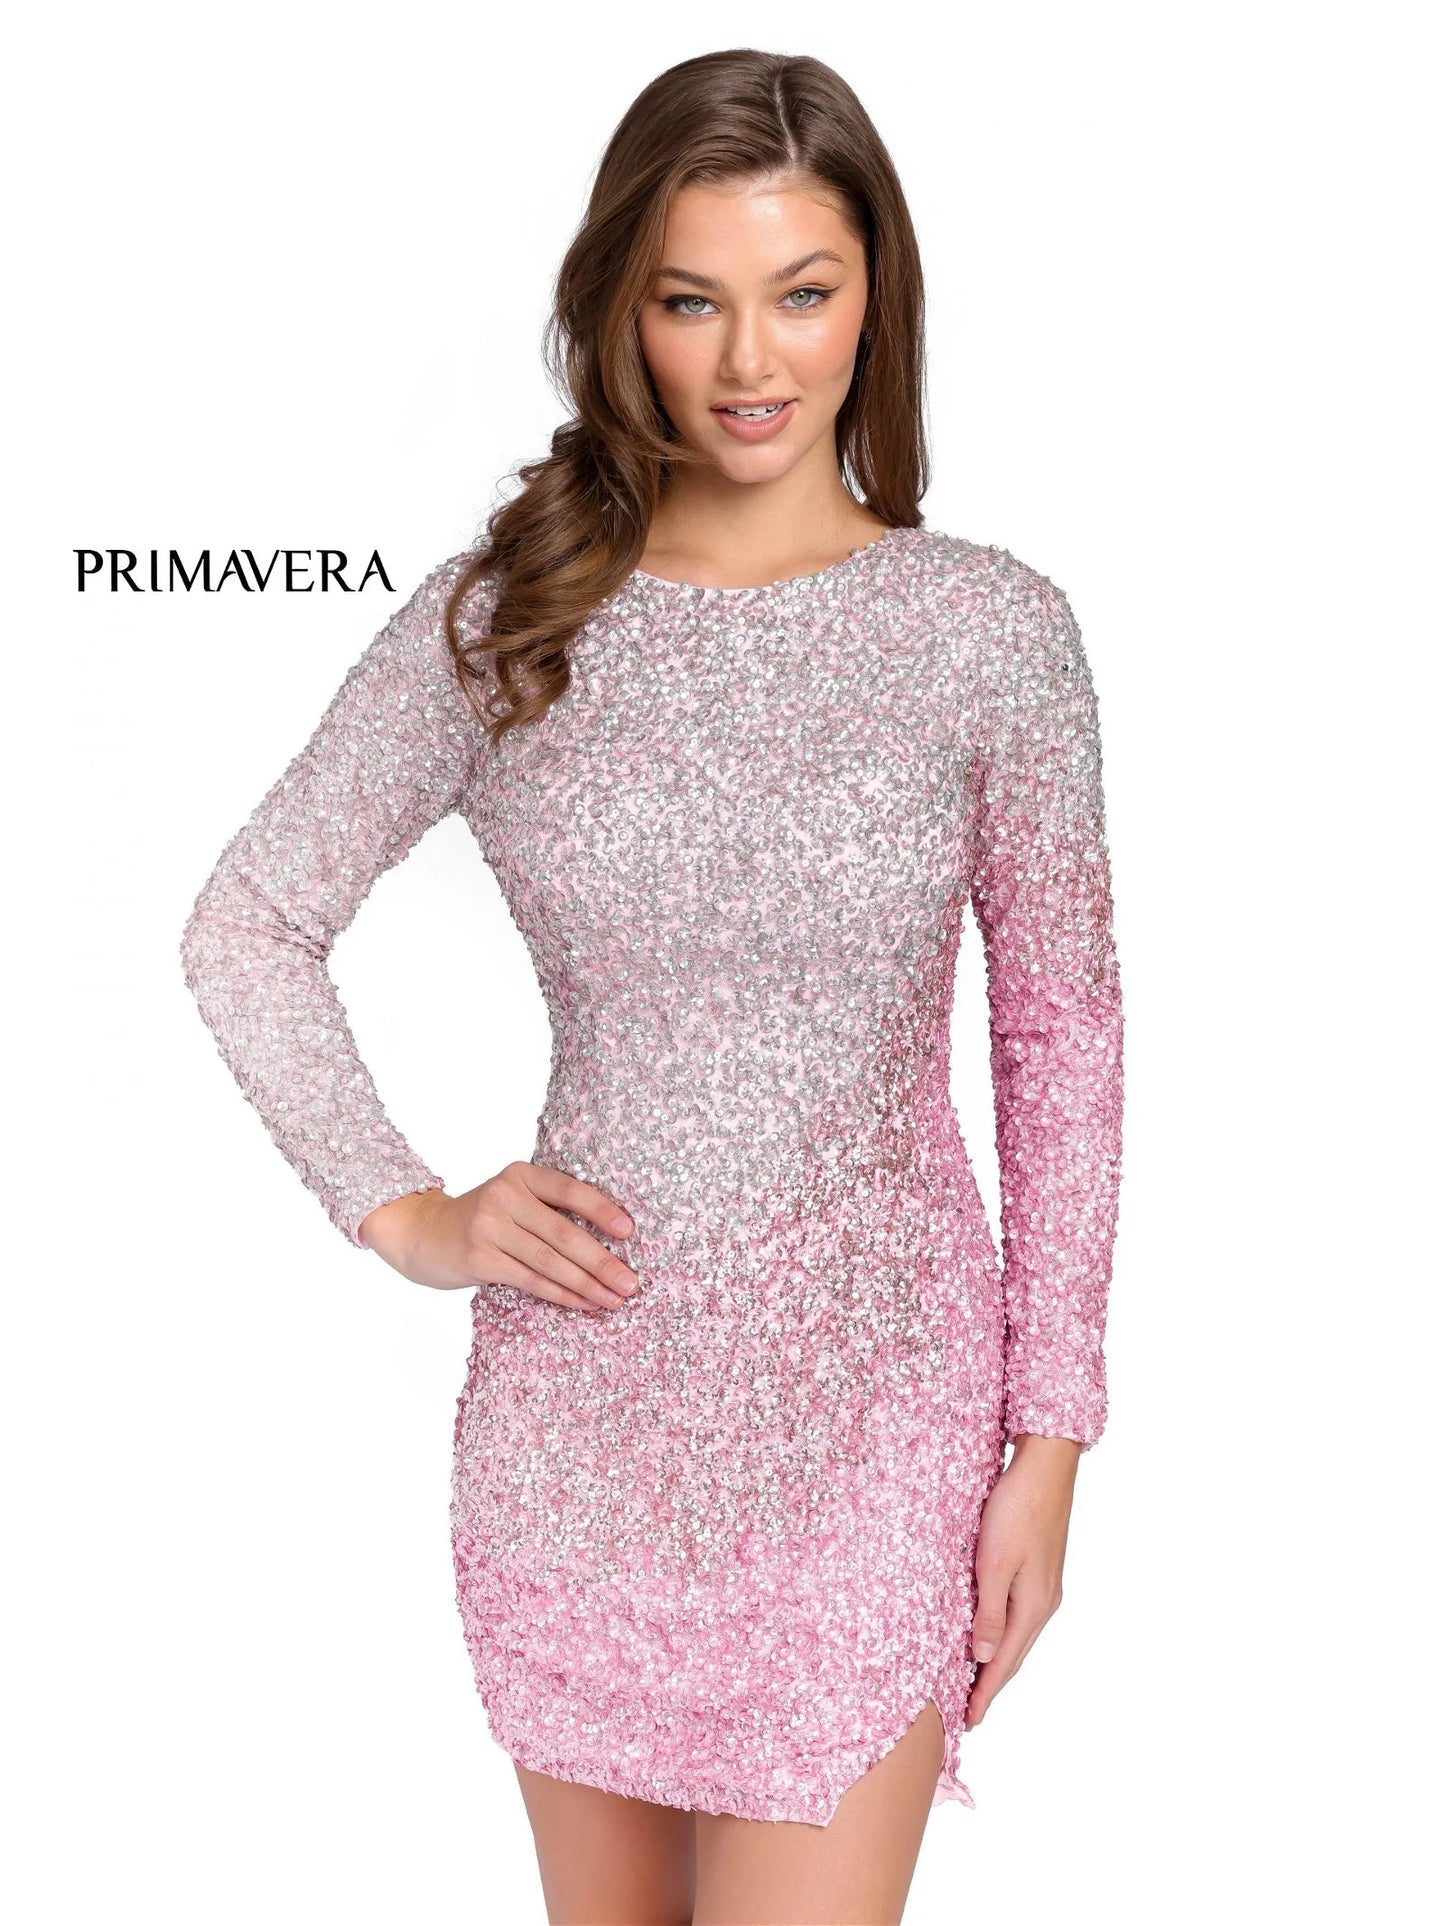 Primavera Couture 3819 Short 2023 Homecoming Dress Fitted Long sleeve backless Sequin Cocktail Dress. Ombre color shift with a slit in skirt.  Available Color- Black, Light Blue, Pink, Lavender, Mint, Nude/Multi  Available Size-00-18